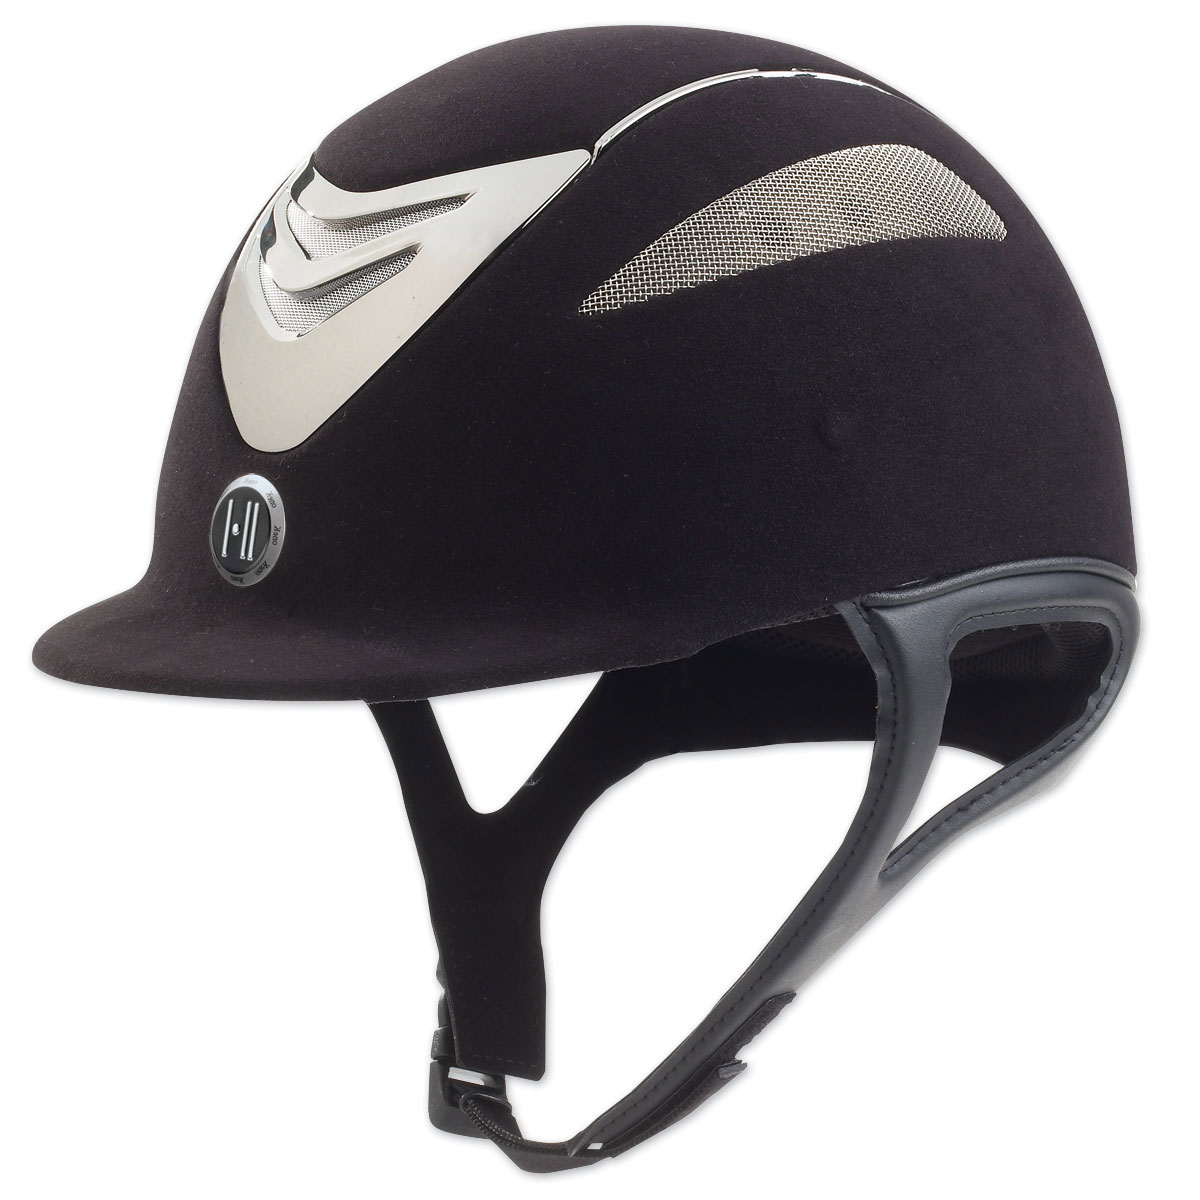 One K Defender Suede Riding Helmet with Comfort Padded Harness and Molded Shell 